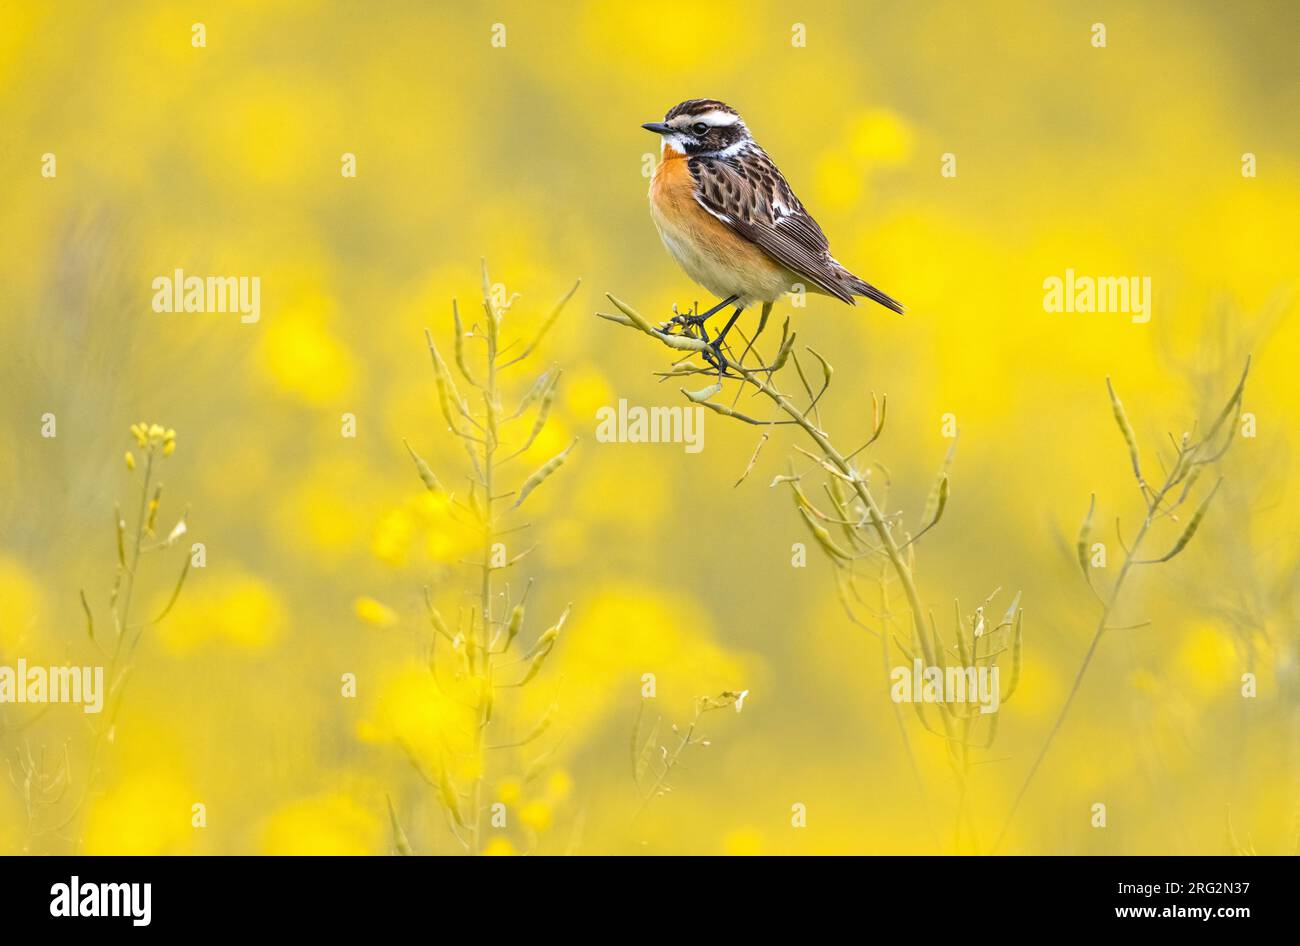 Adult Whinchat (Saxicola rubetra) perched in a field with yellow flowers in Italy. Stock Photo